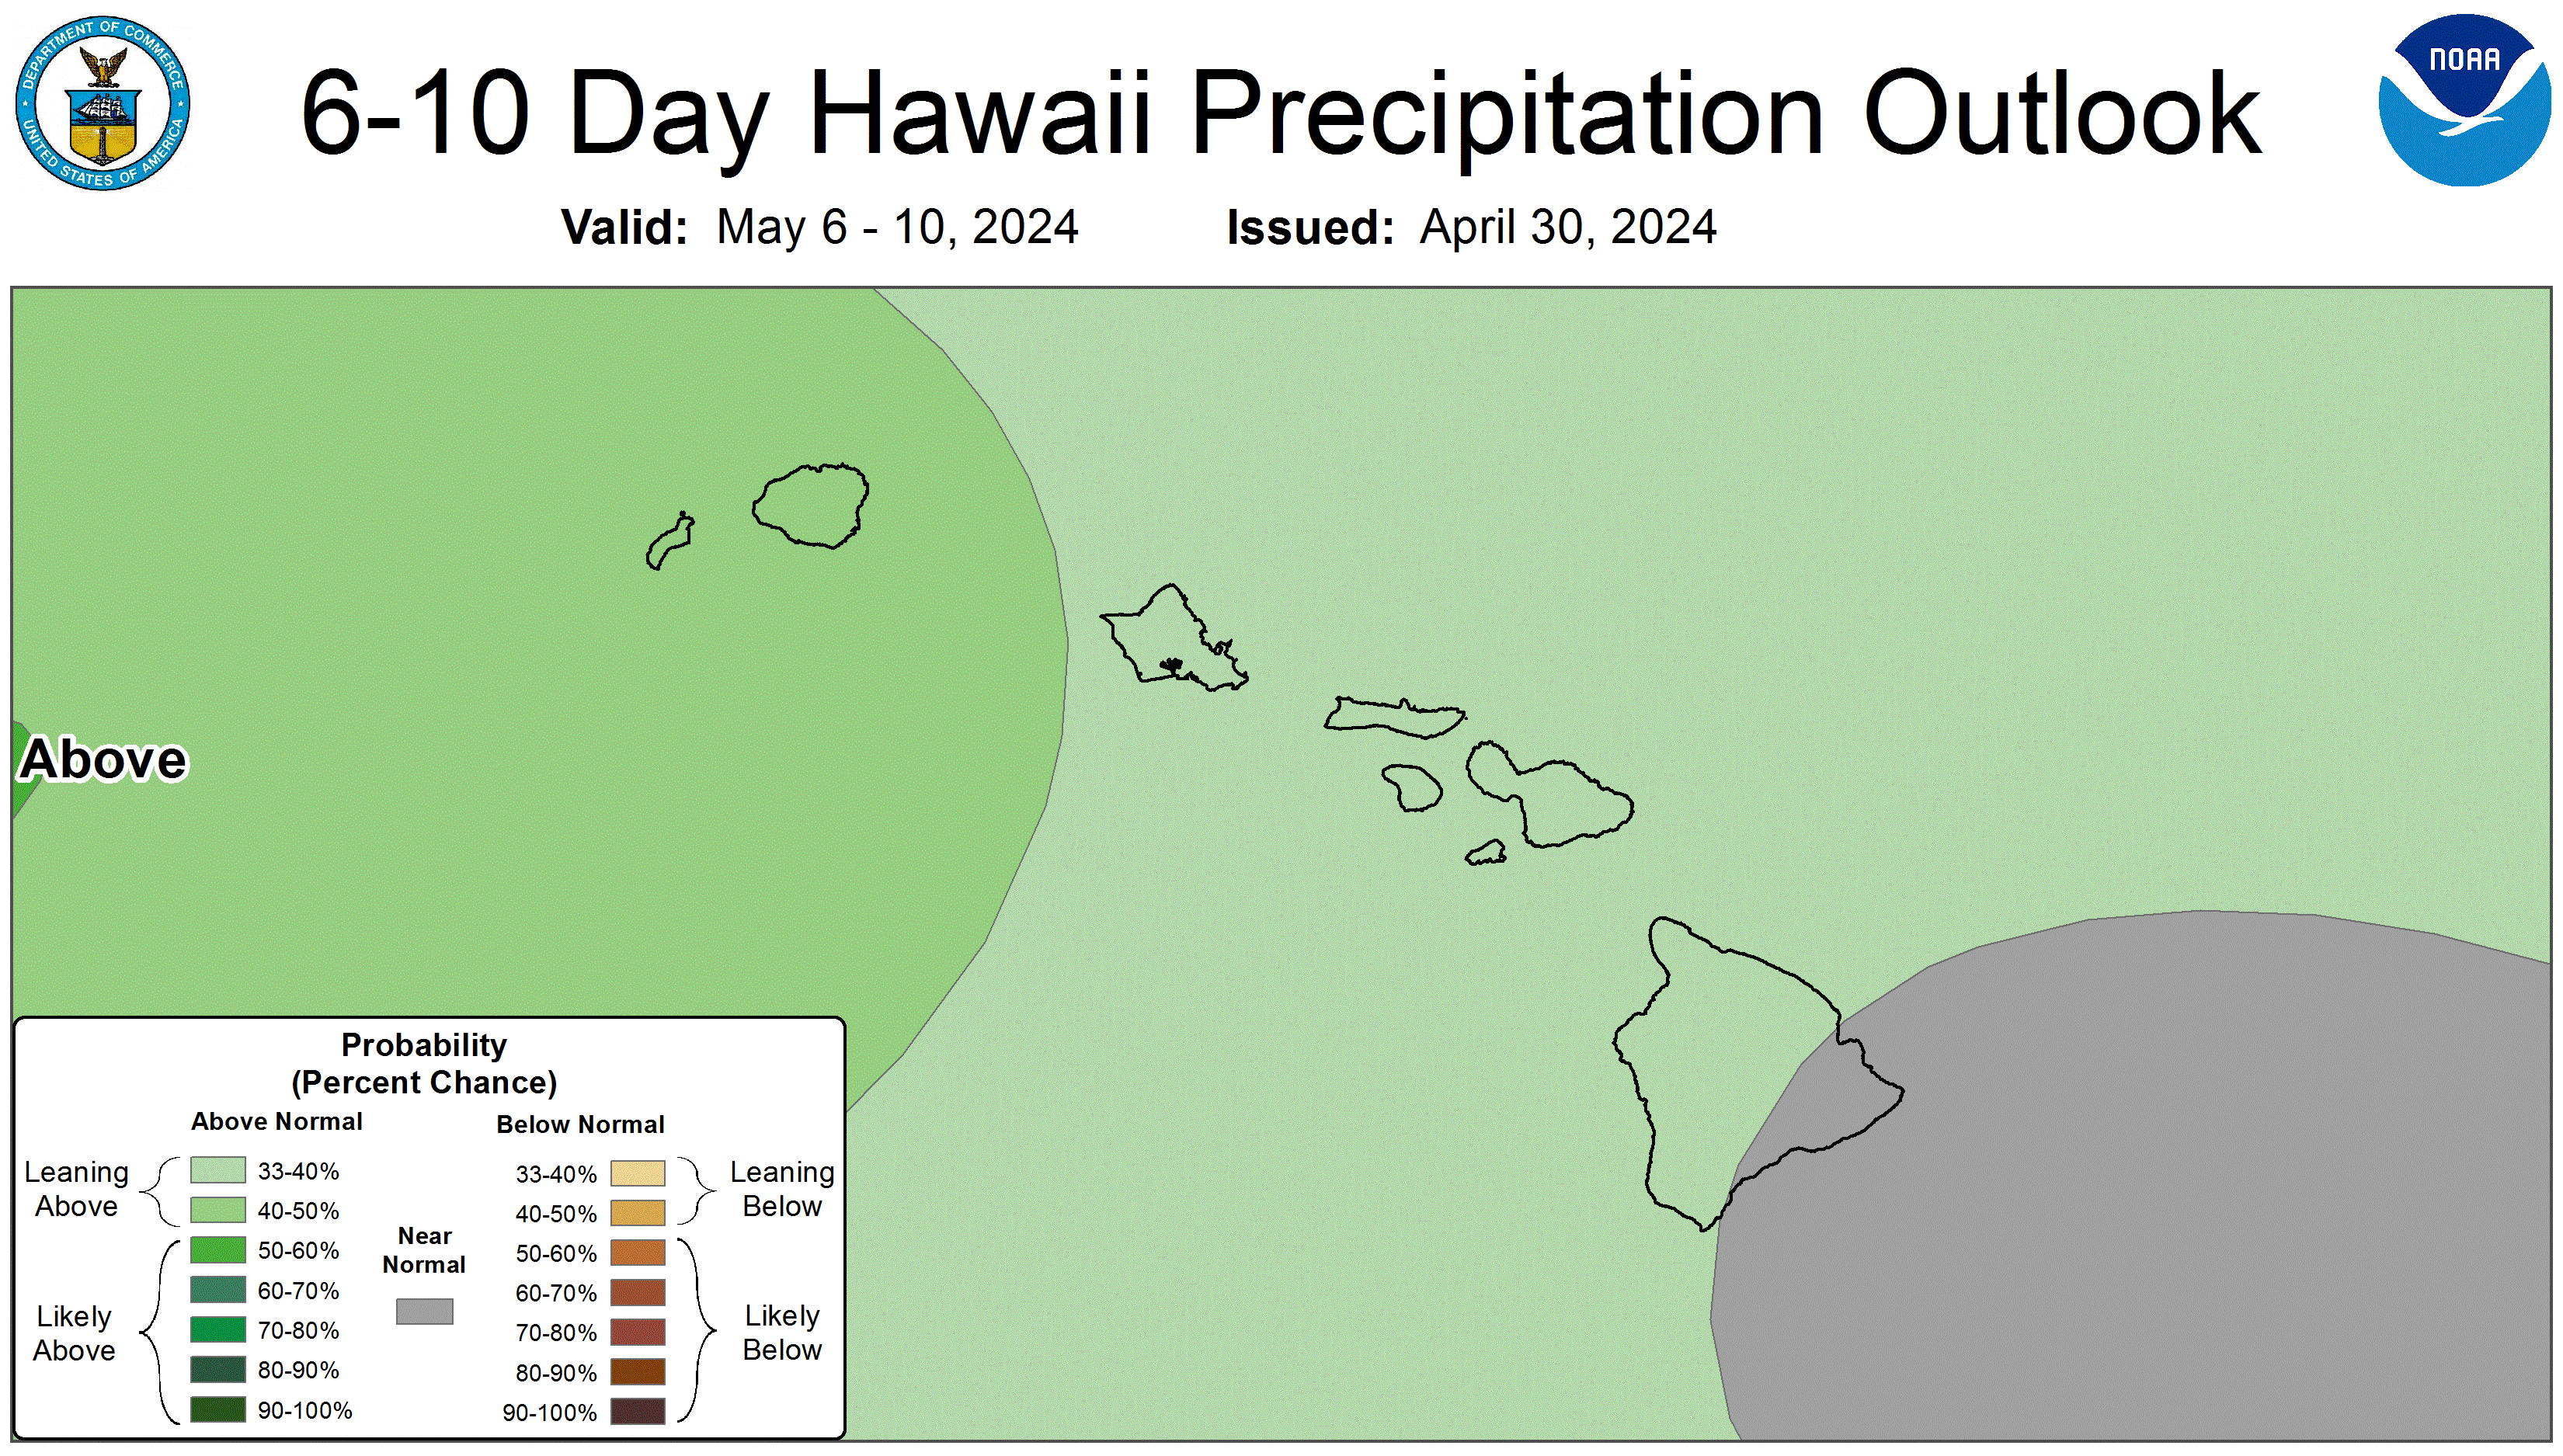 Graphical forecast for the 6 to 10 day precipitation forecast. Showing a zoomed in view of the main Hawaiian Islands